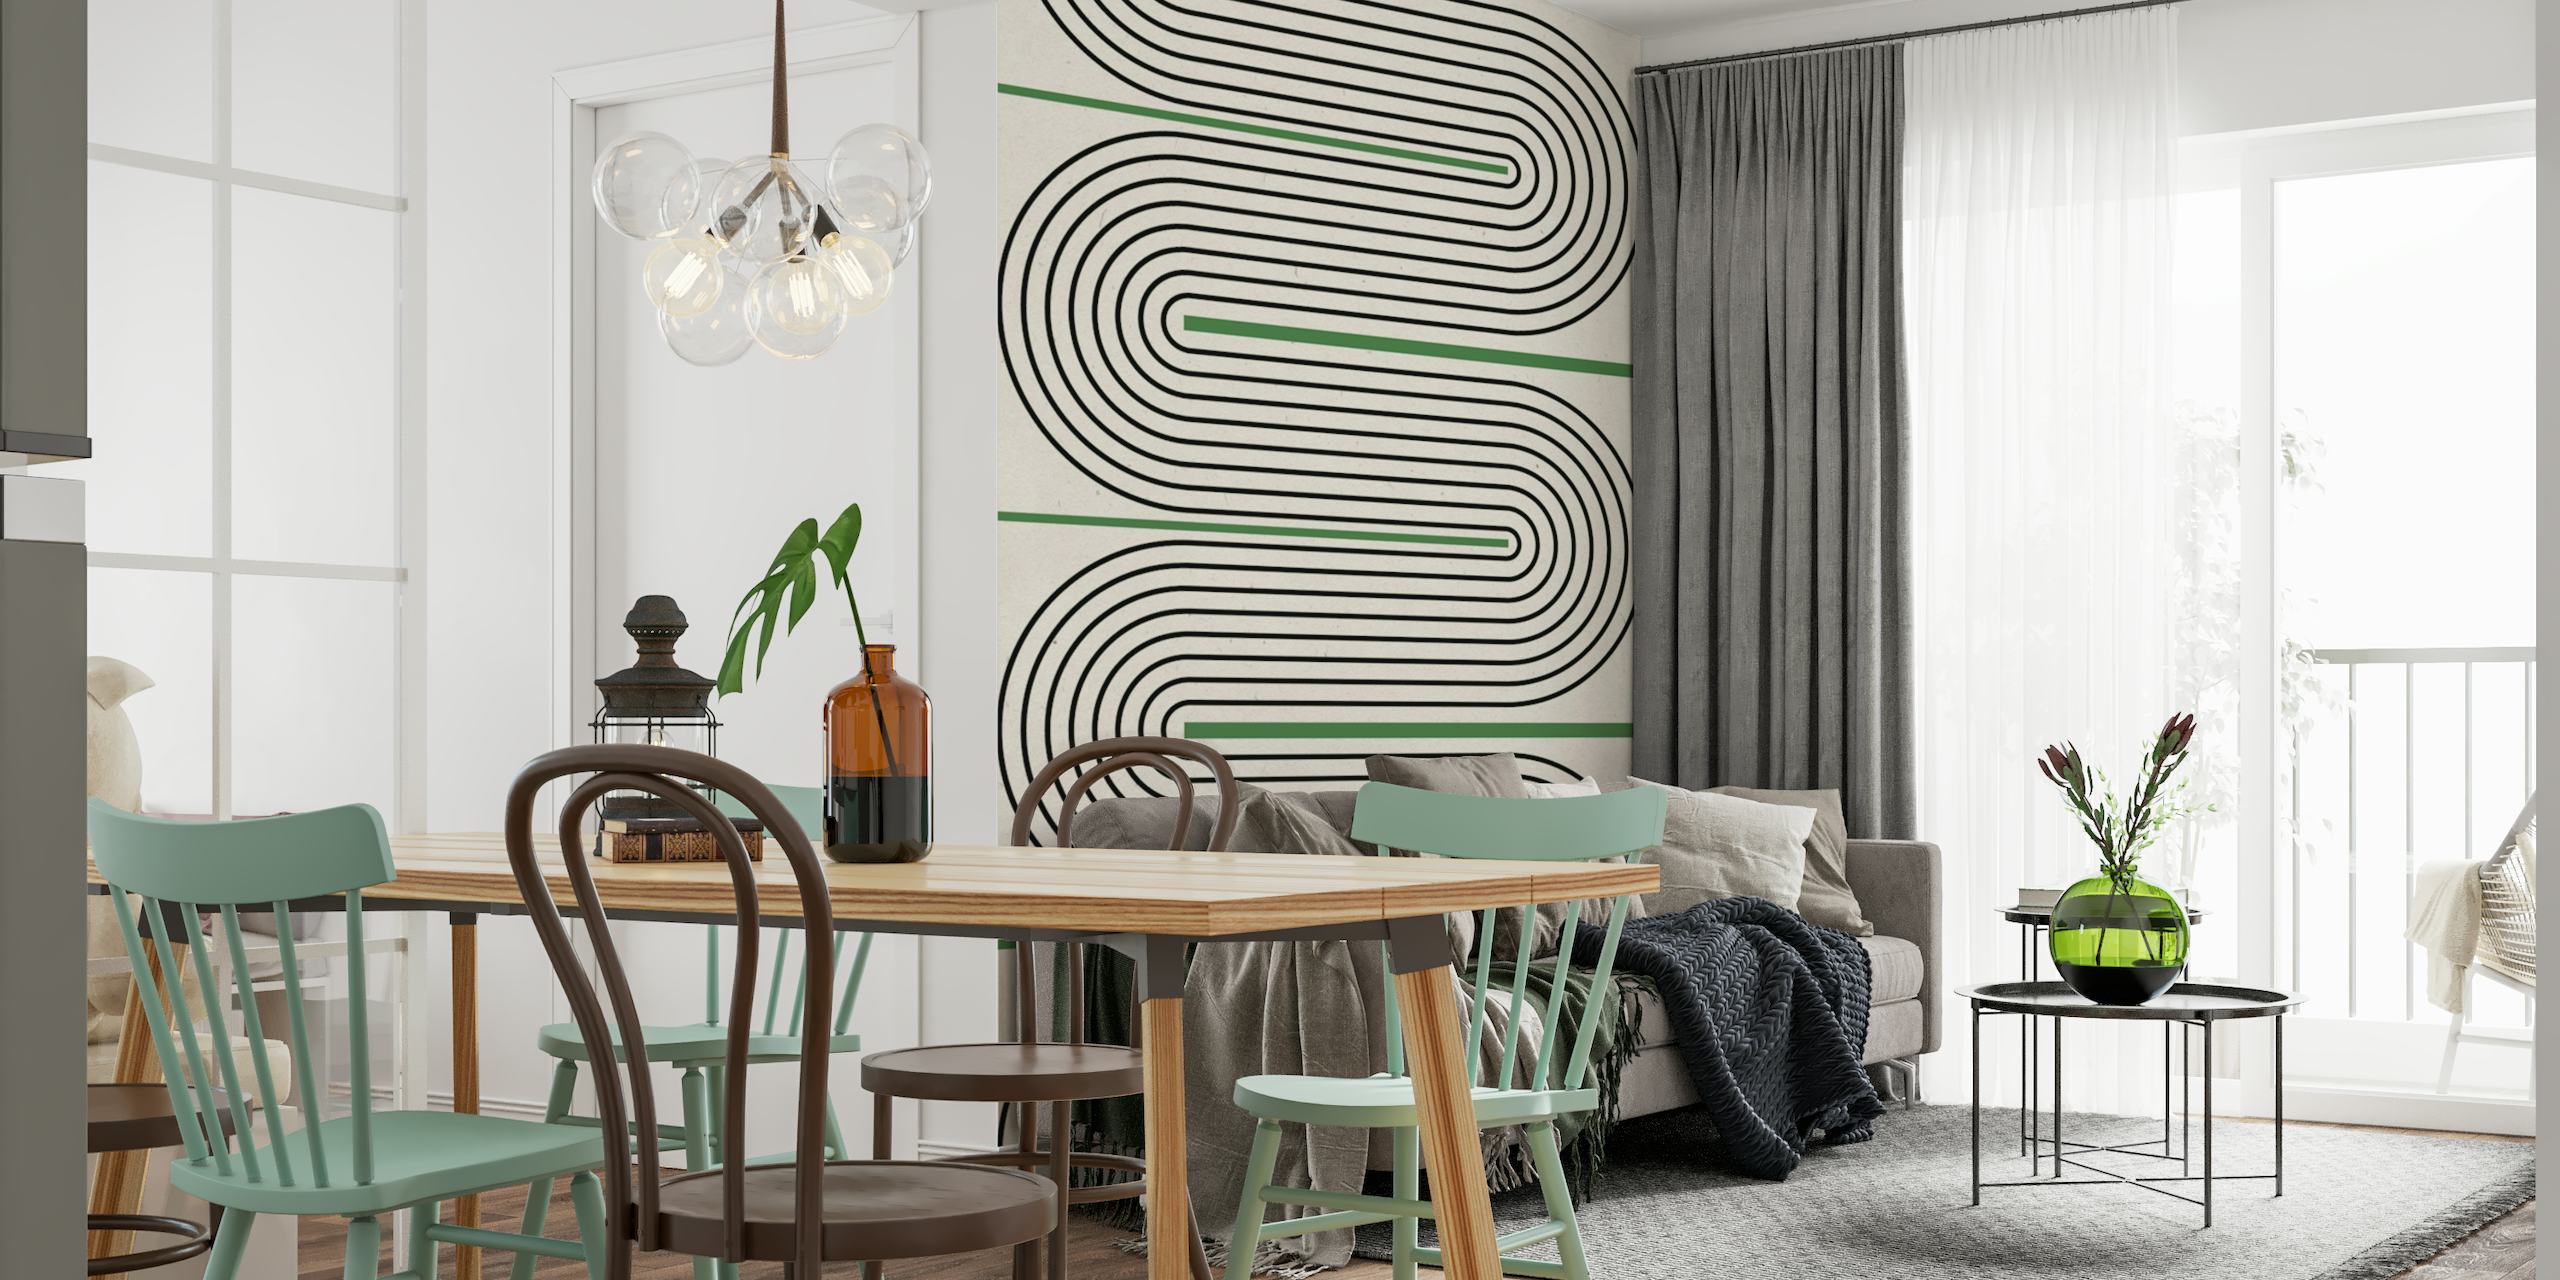 Mid-century modern wall mural with green and black lines on a neutral background